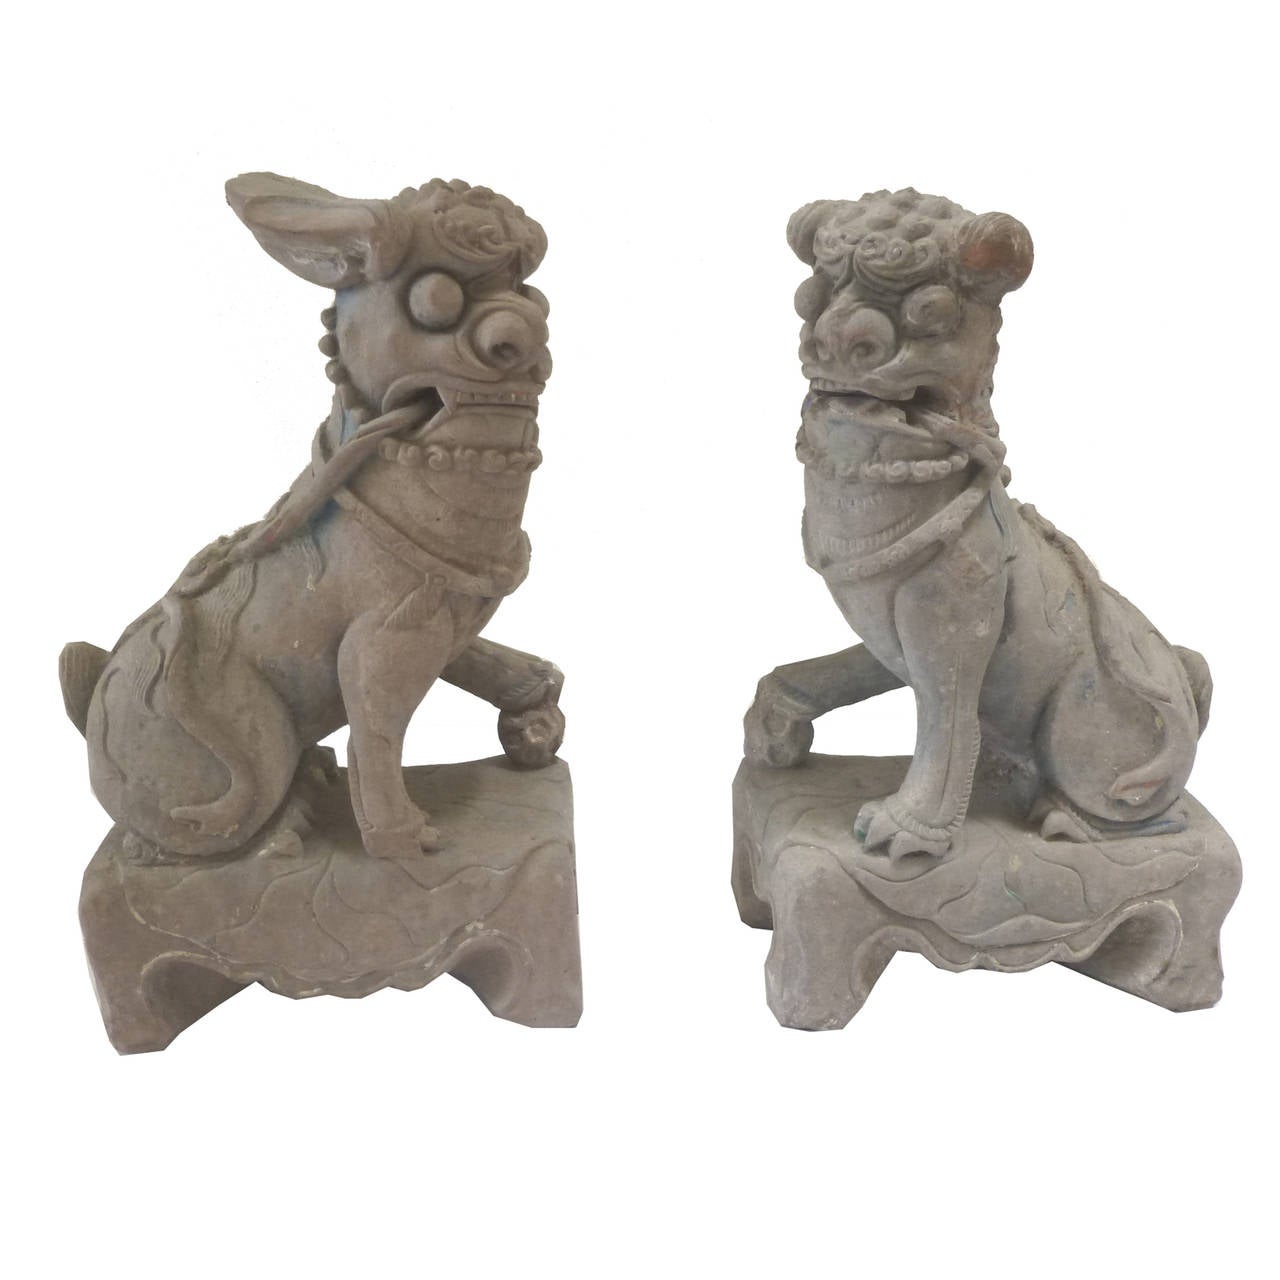 Stone lions have been used by the Chinese as guardians against bad elements since the Han dynasty. Through different dynasties, the shape, form and decorative motives change and evolve from abstract to realistic to stylistic incorporating symbolism